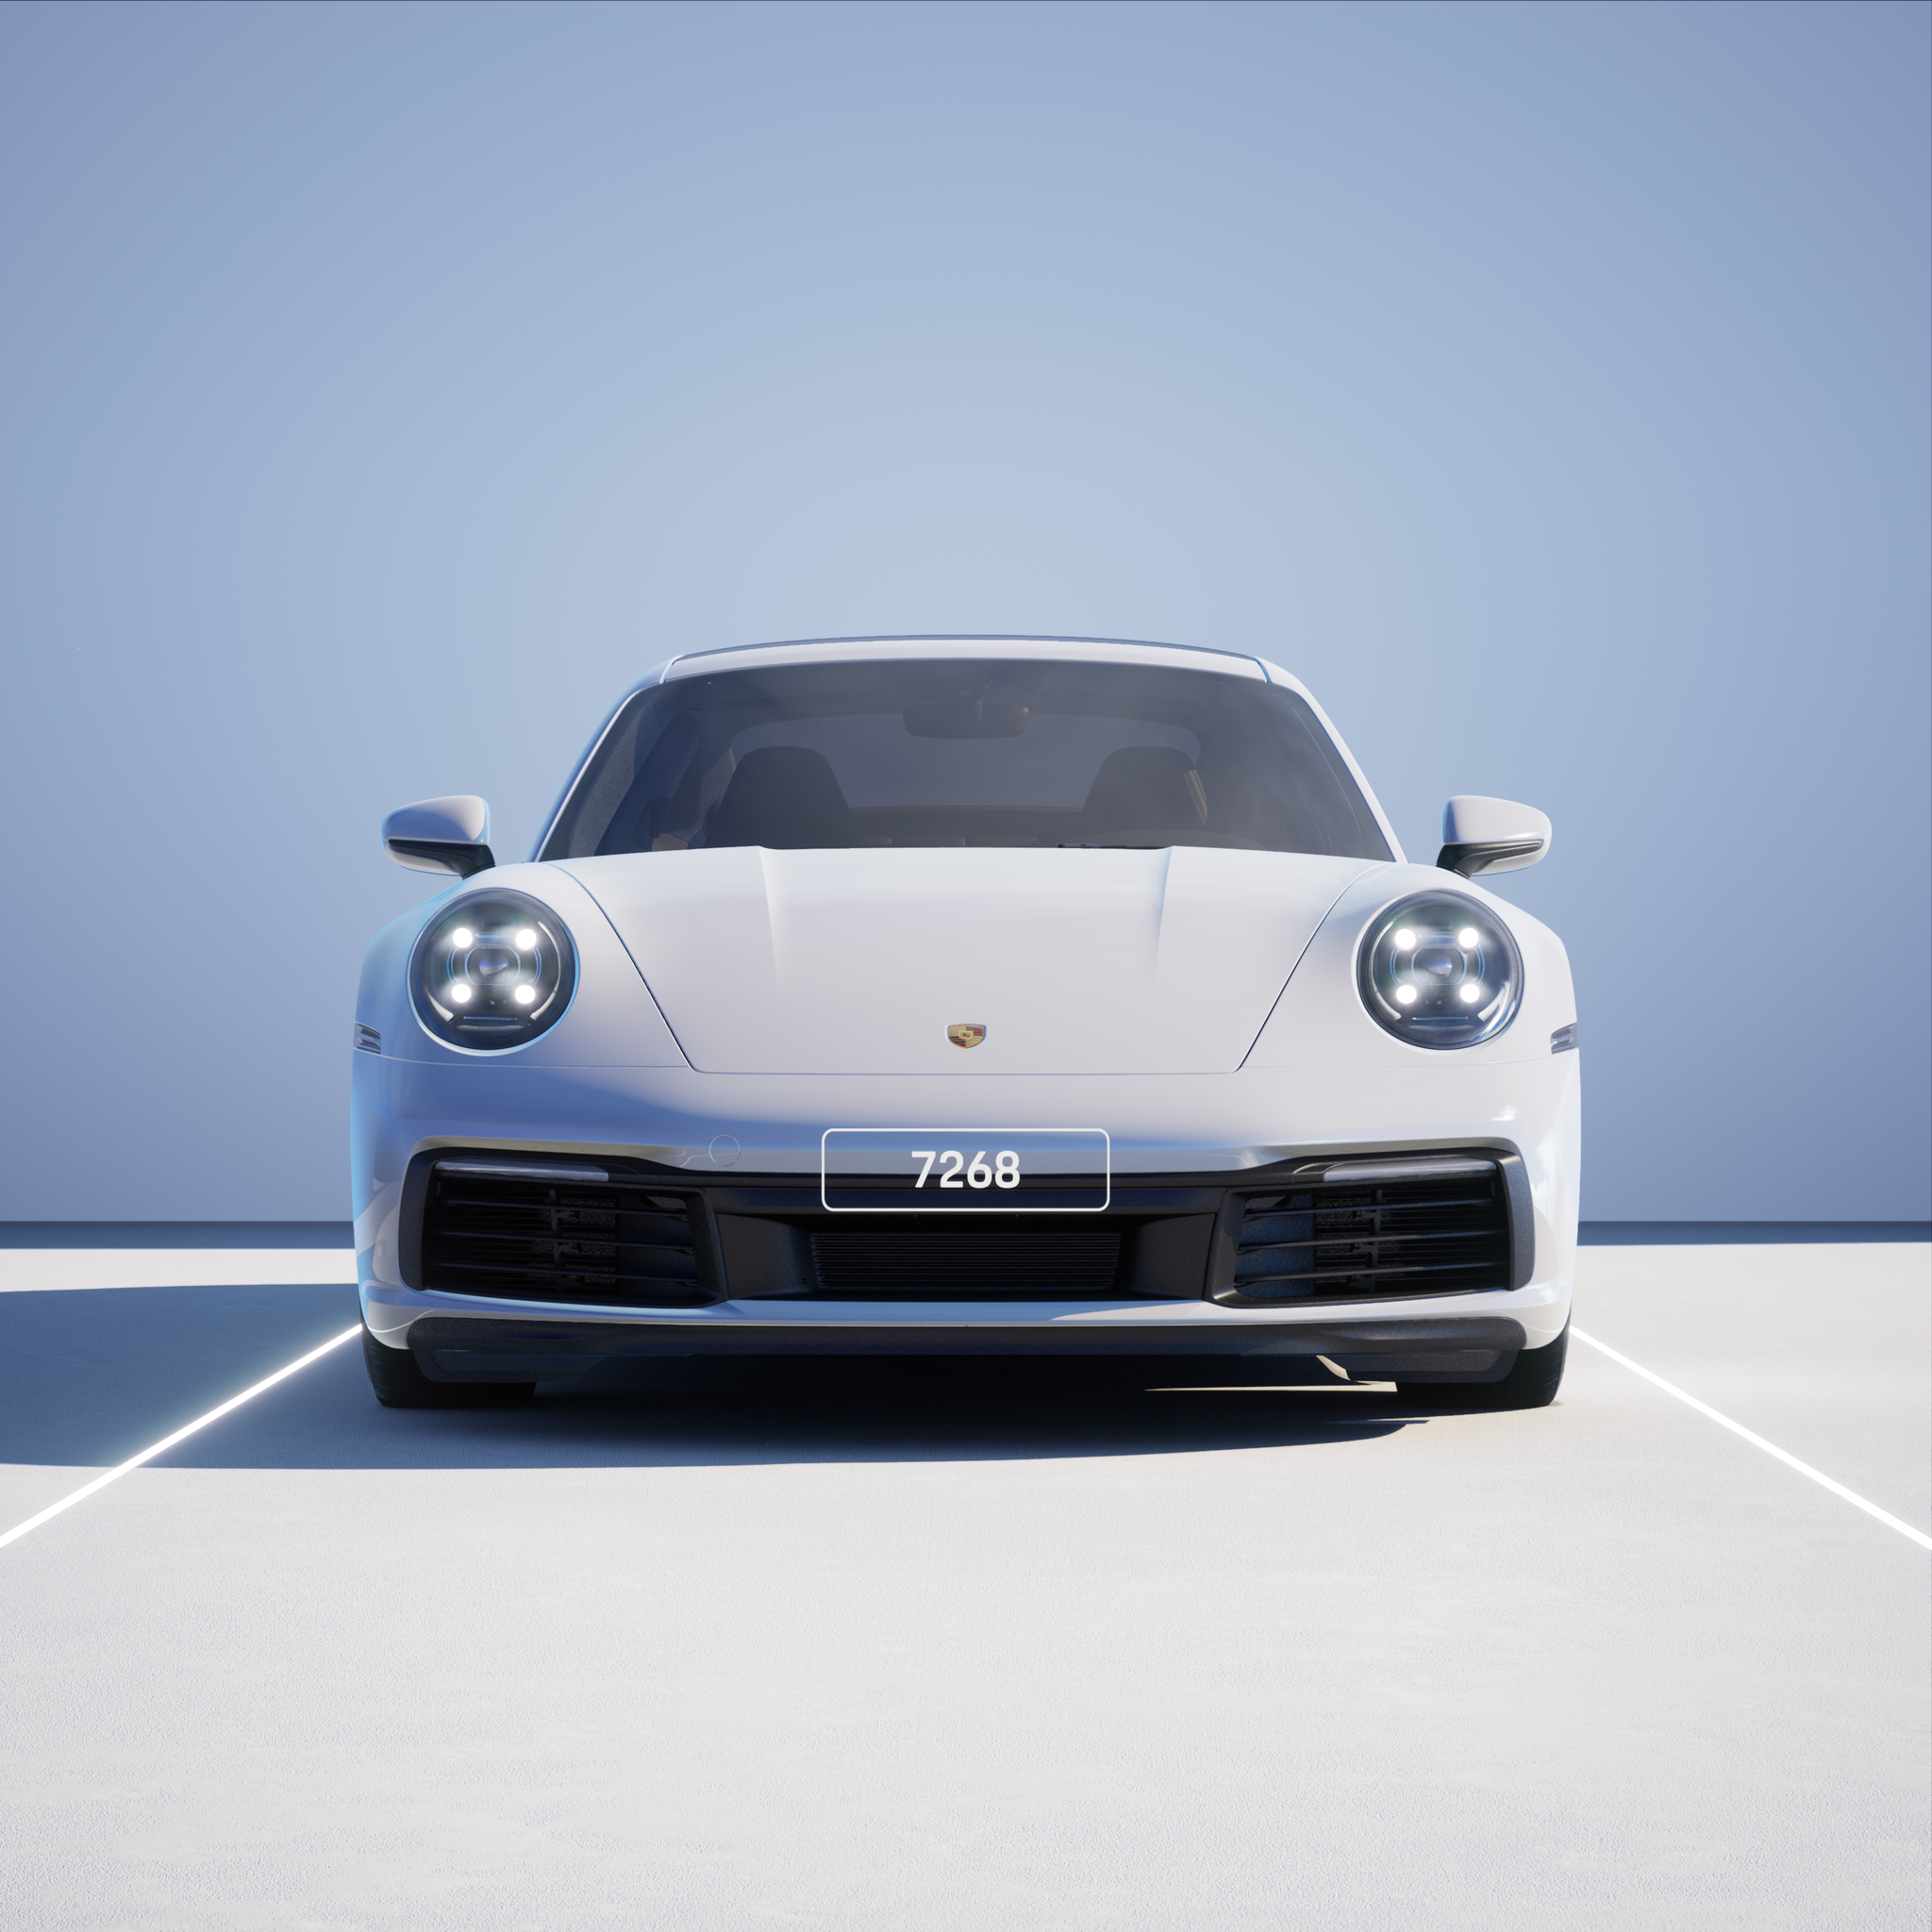 The PORSCHΞ 911 7268 image in phase